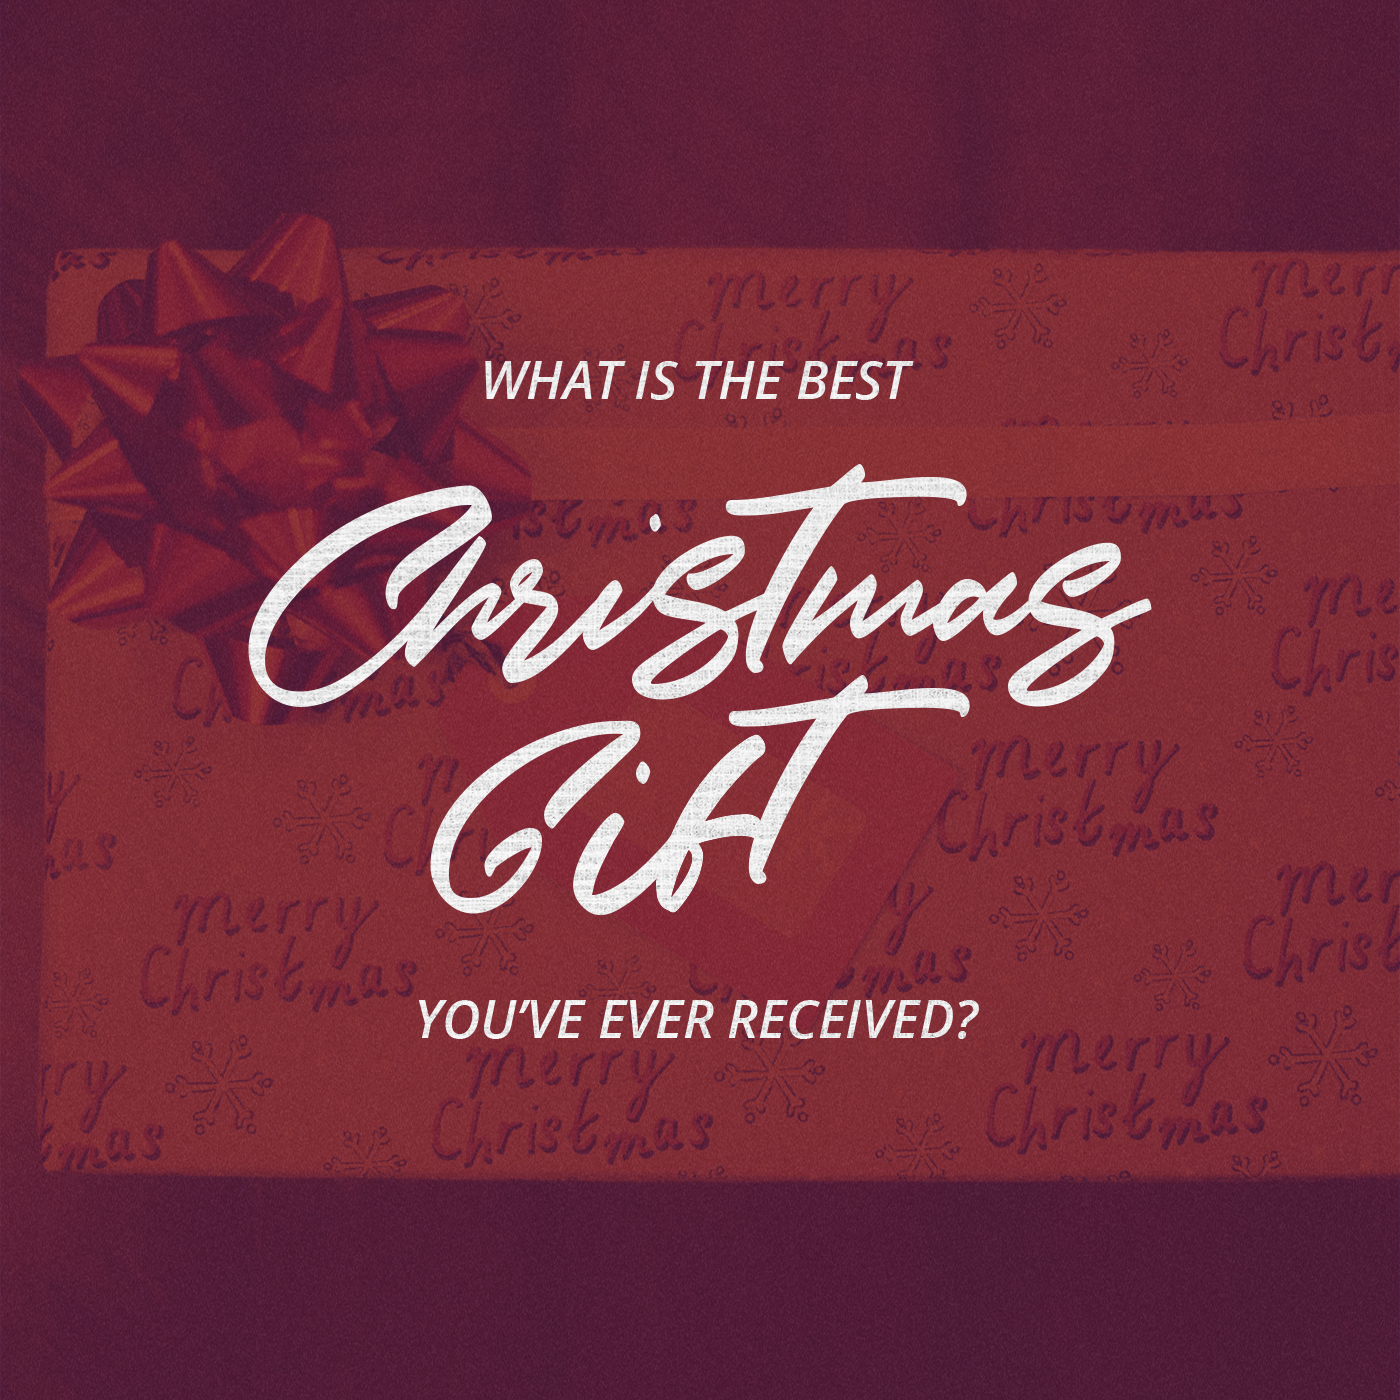 Did You Receive The Best Christmas Gift Ever - Have You Received The Gift - HD Wallpaper 